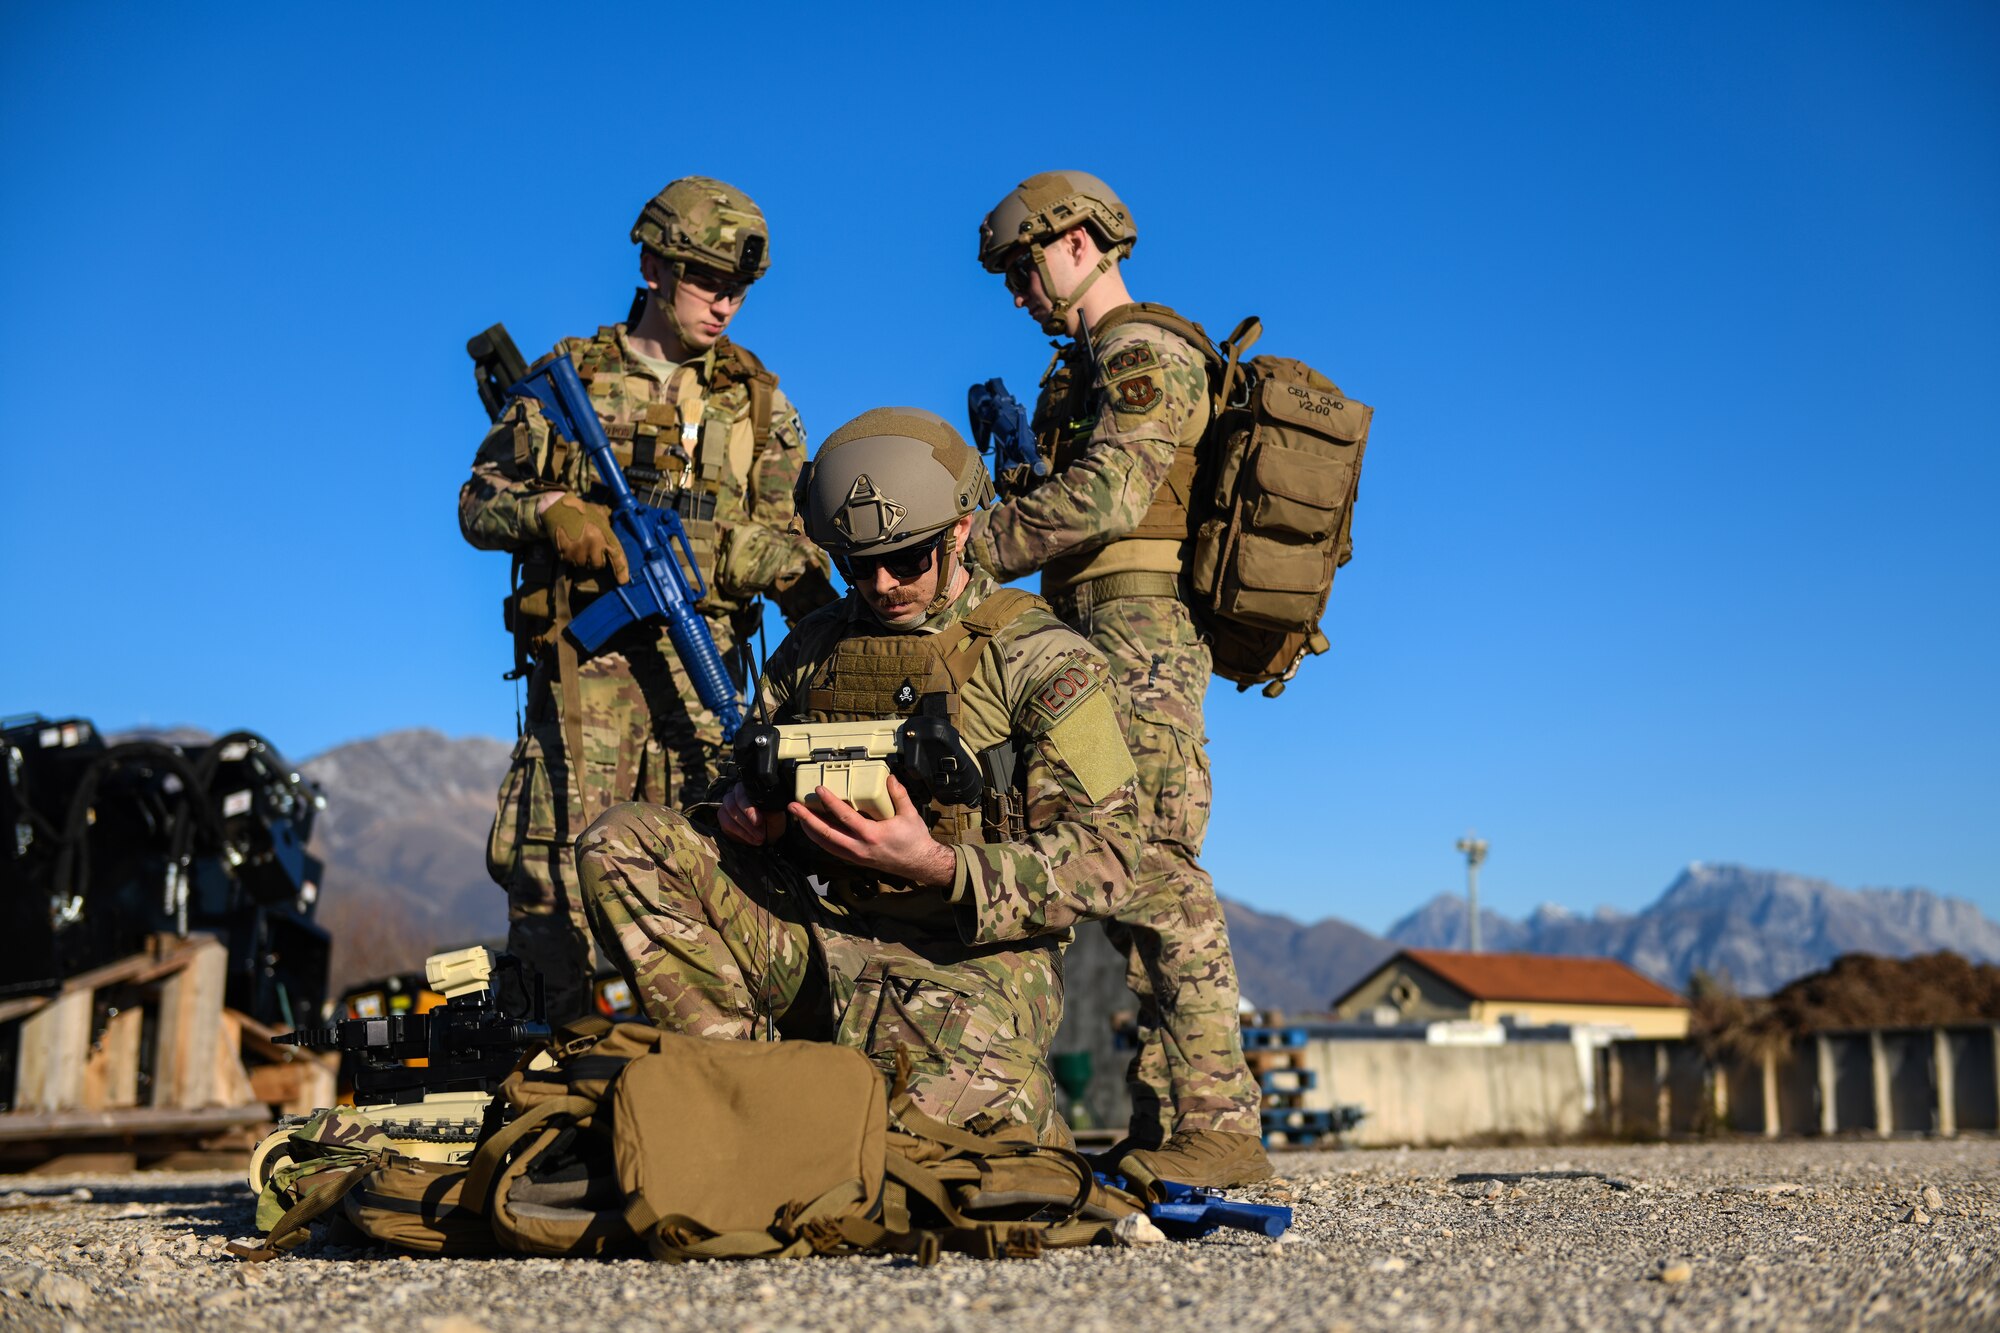 U.S. Air Force Staff Sgt. Jackson Judge, left, Airman 1st Class Tyler McConnell, and Senior Airman Colby Forsythe, explosive ordnance team members from the 31 Civil Engineer Squadron, prepare equipment during a training exercise at Aviano Air Base, Italy, Jan. 8, 2020. EOD Airmen are often assigned to some of the most dangerous missions and  perform tactically harrowing and technically demanding tasks in diverse environments worldwide. (U.S. Air Force photo by Airman 1st Class Ericka A. Woolever).